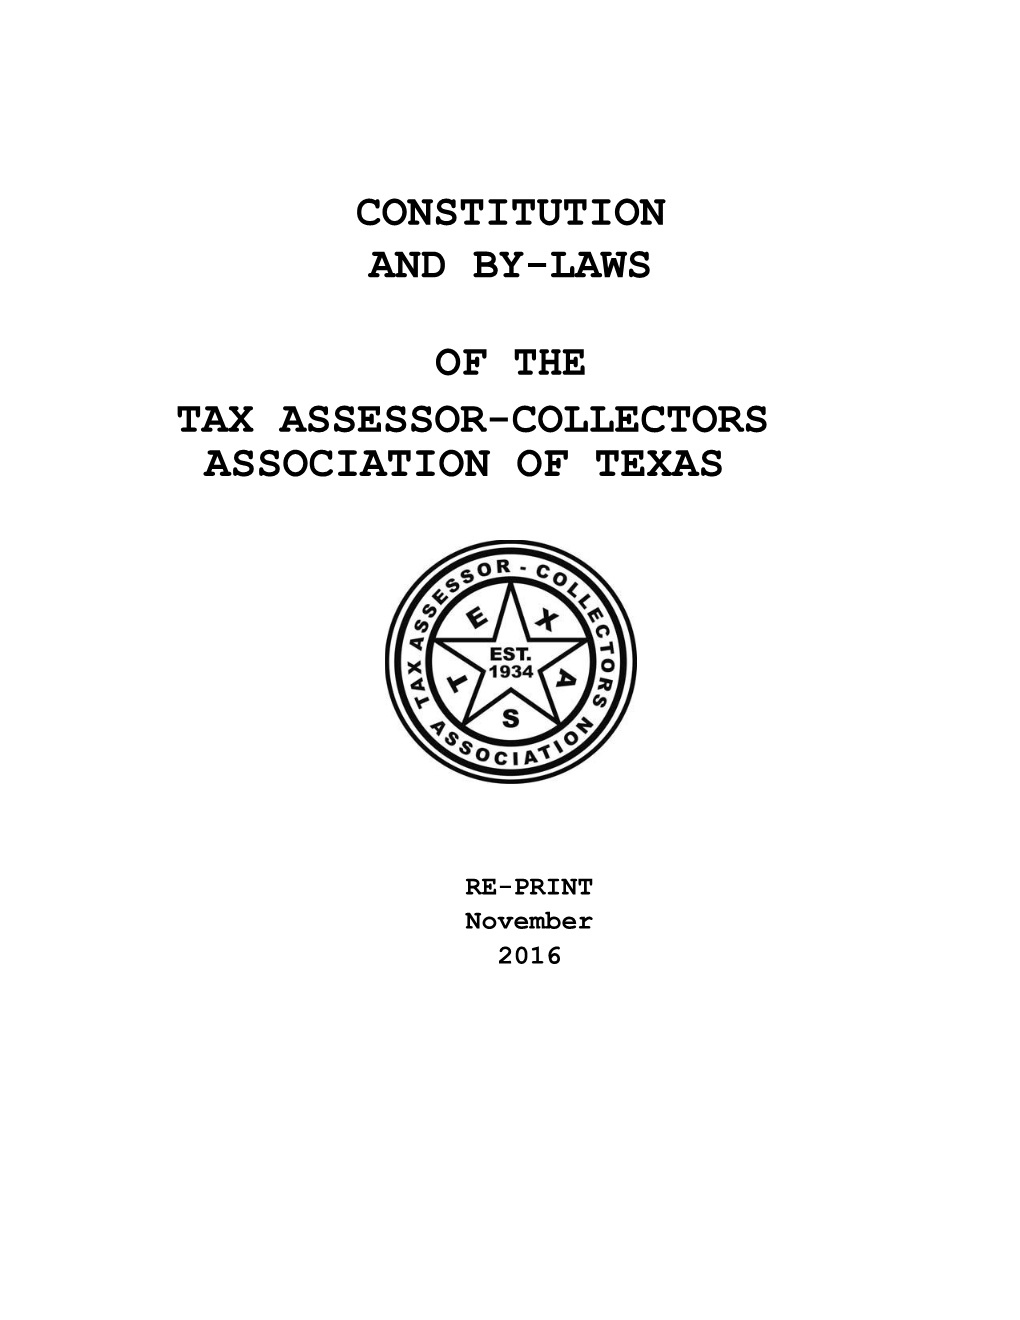 By Laws of the Tax Assessor Collectors Association of Texa